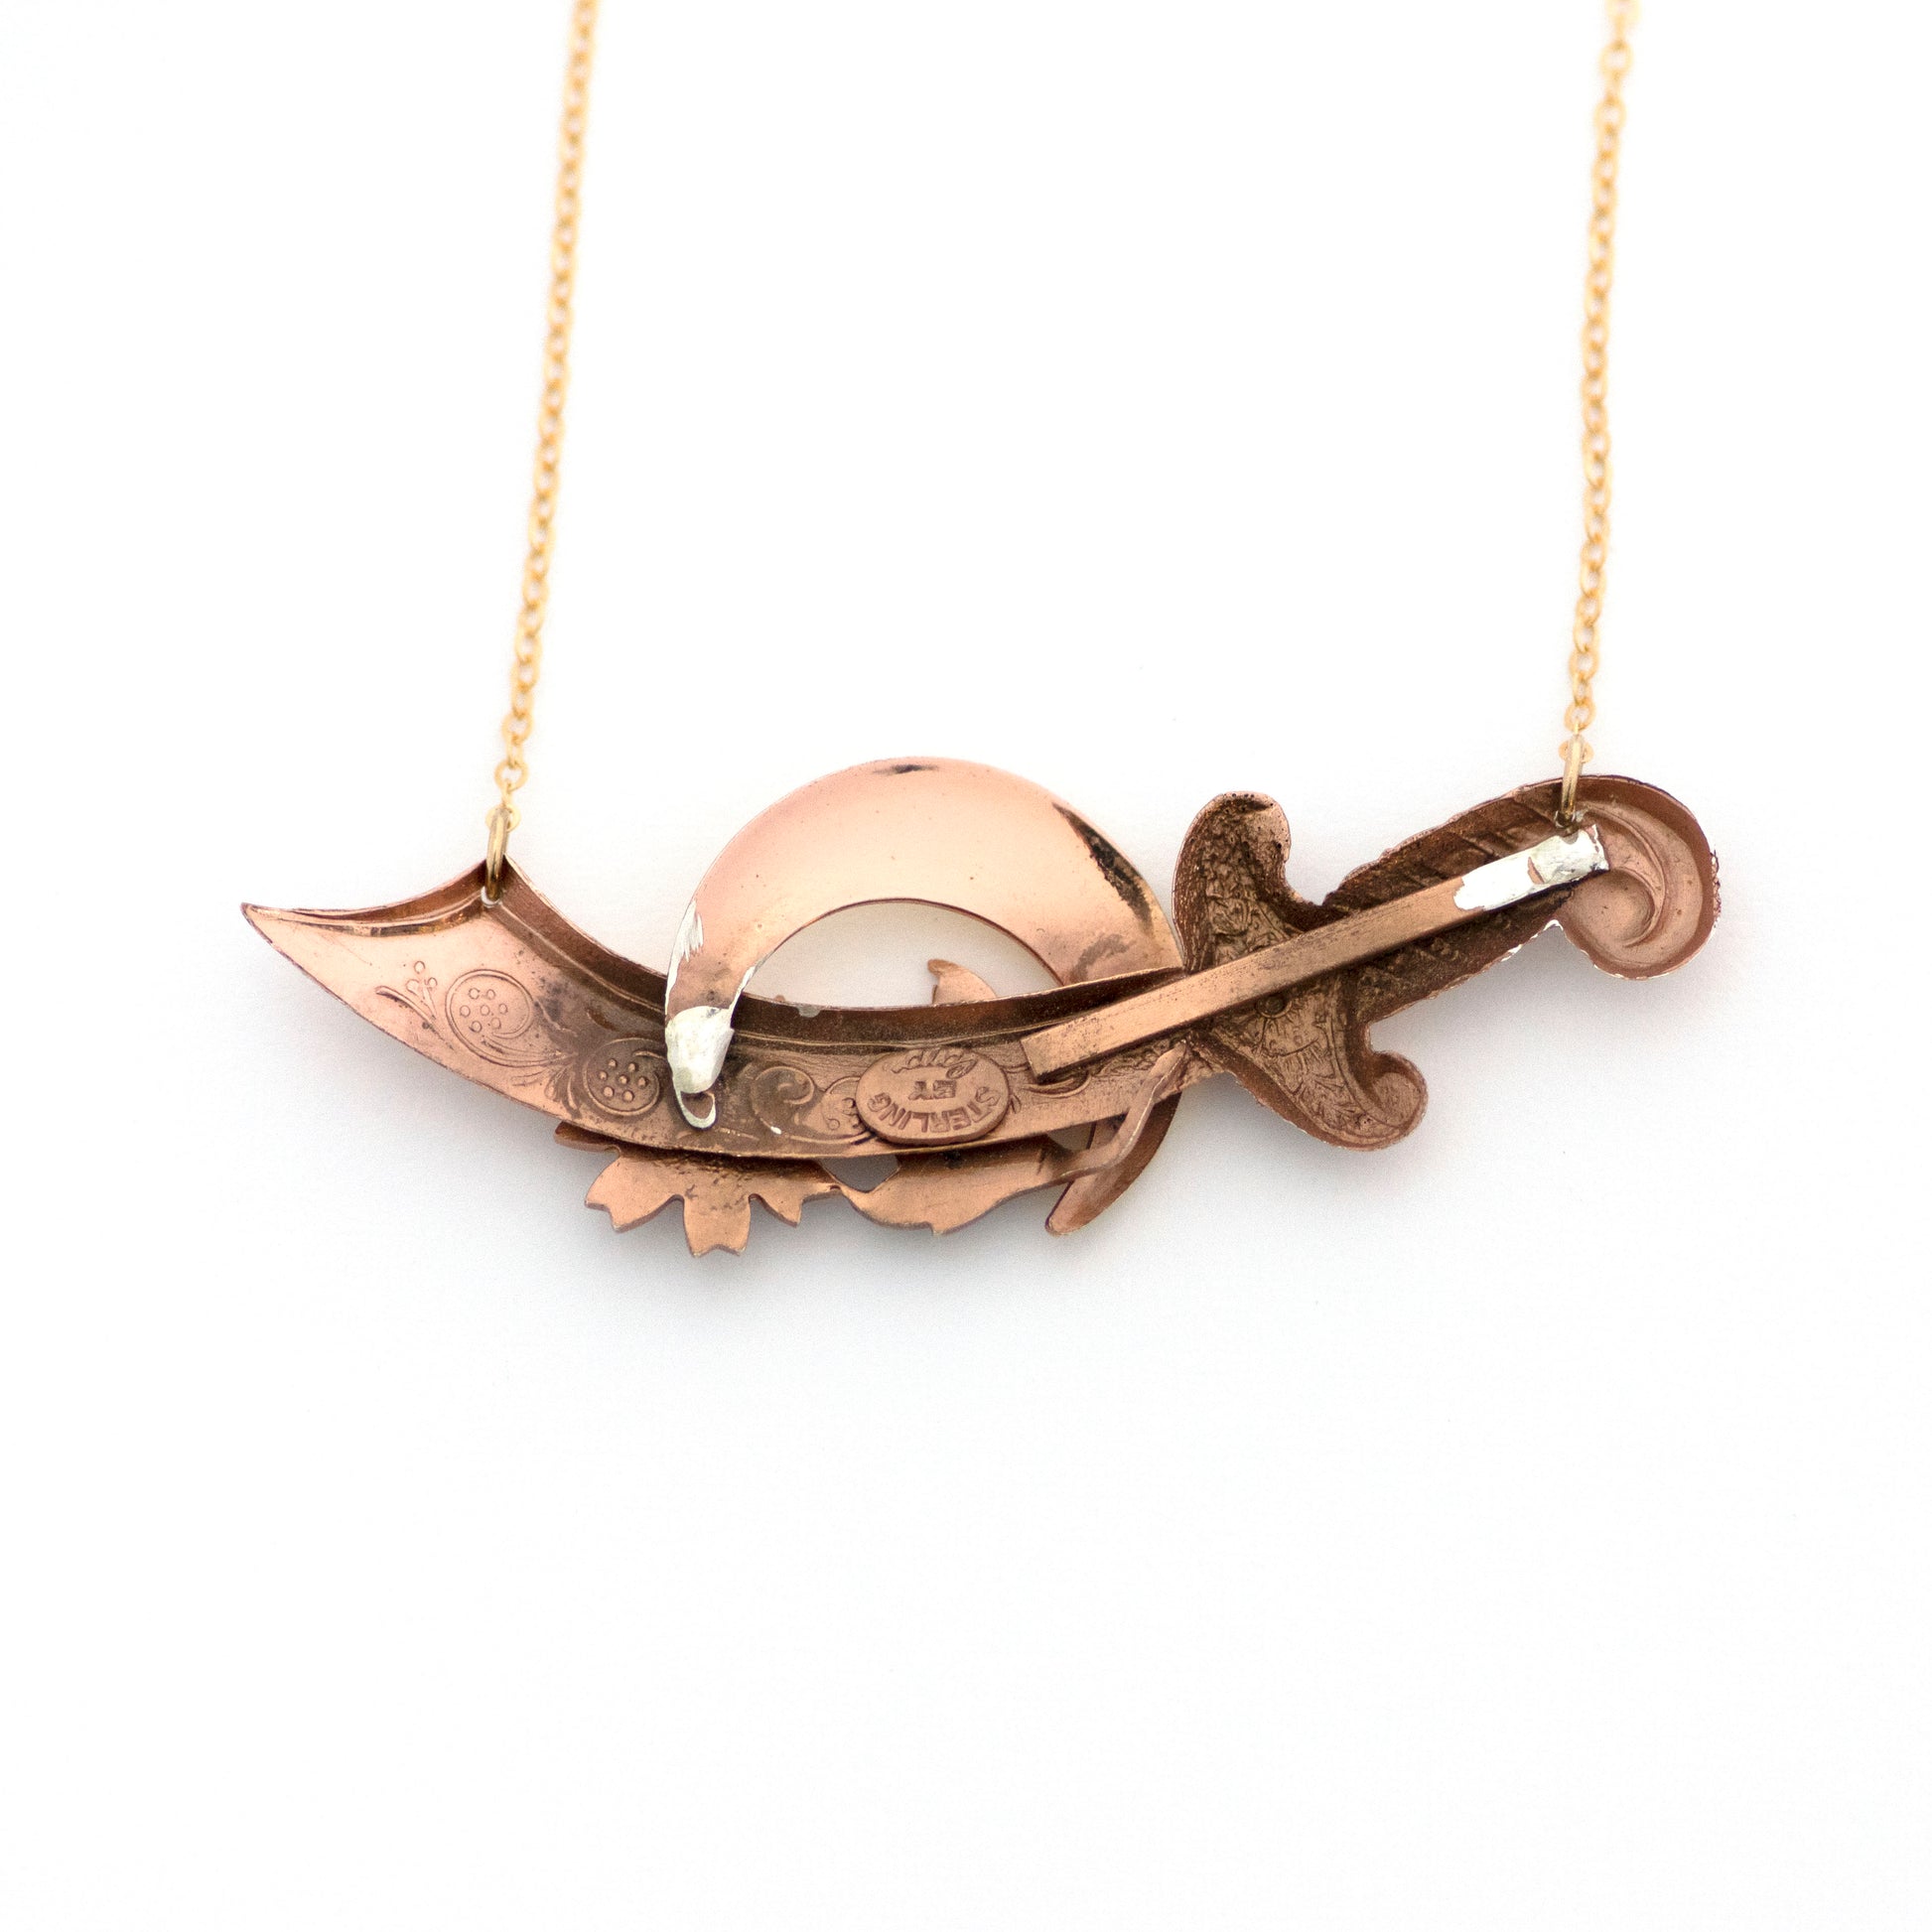 back of vintage bar pin necklace made from rose gold vermeil. Hallmarked "Sterling by Coro"